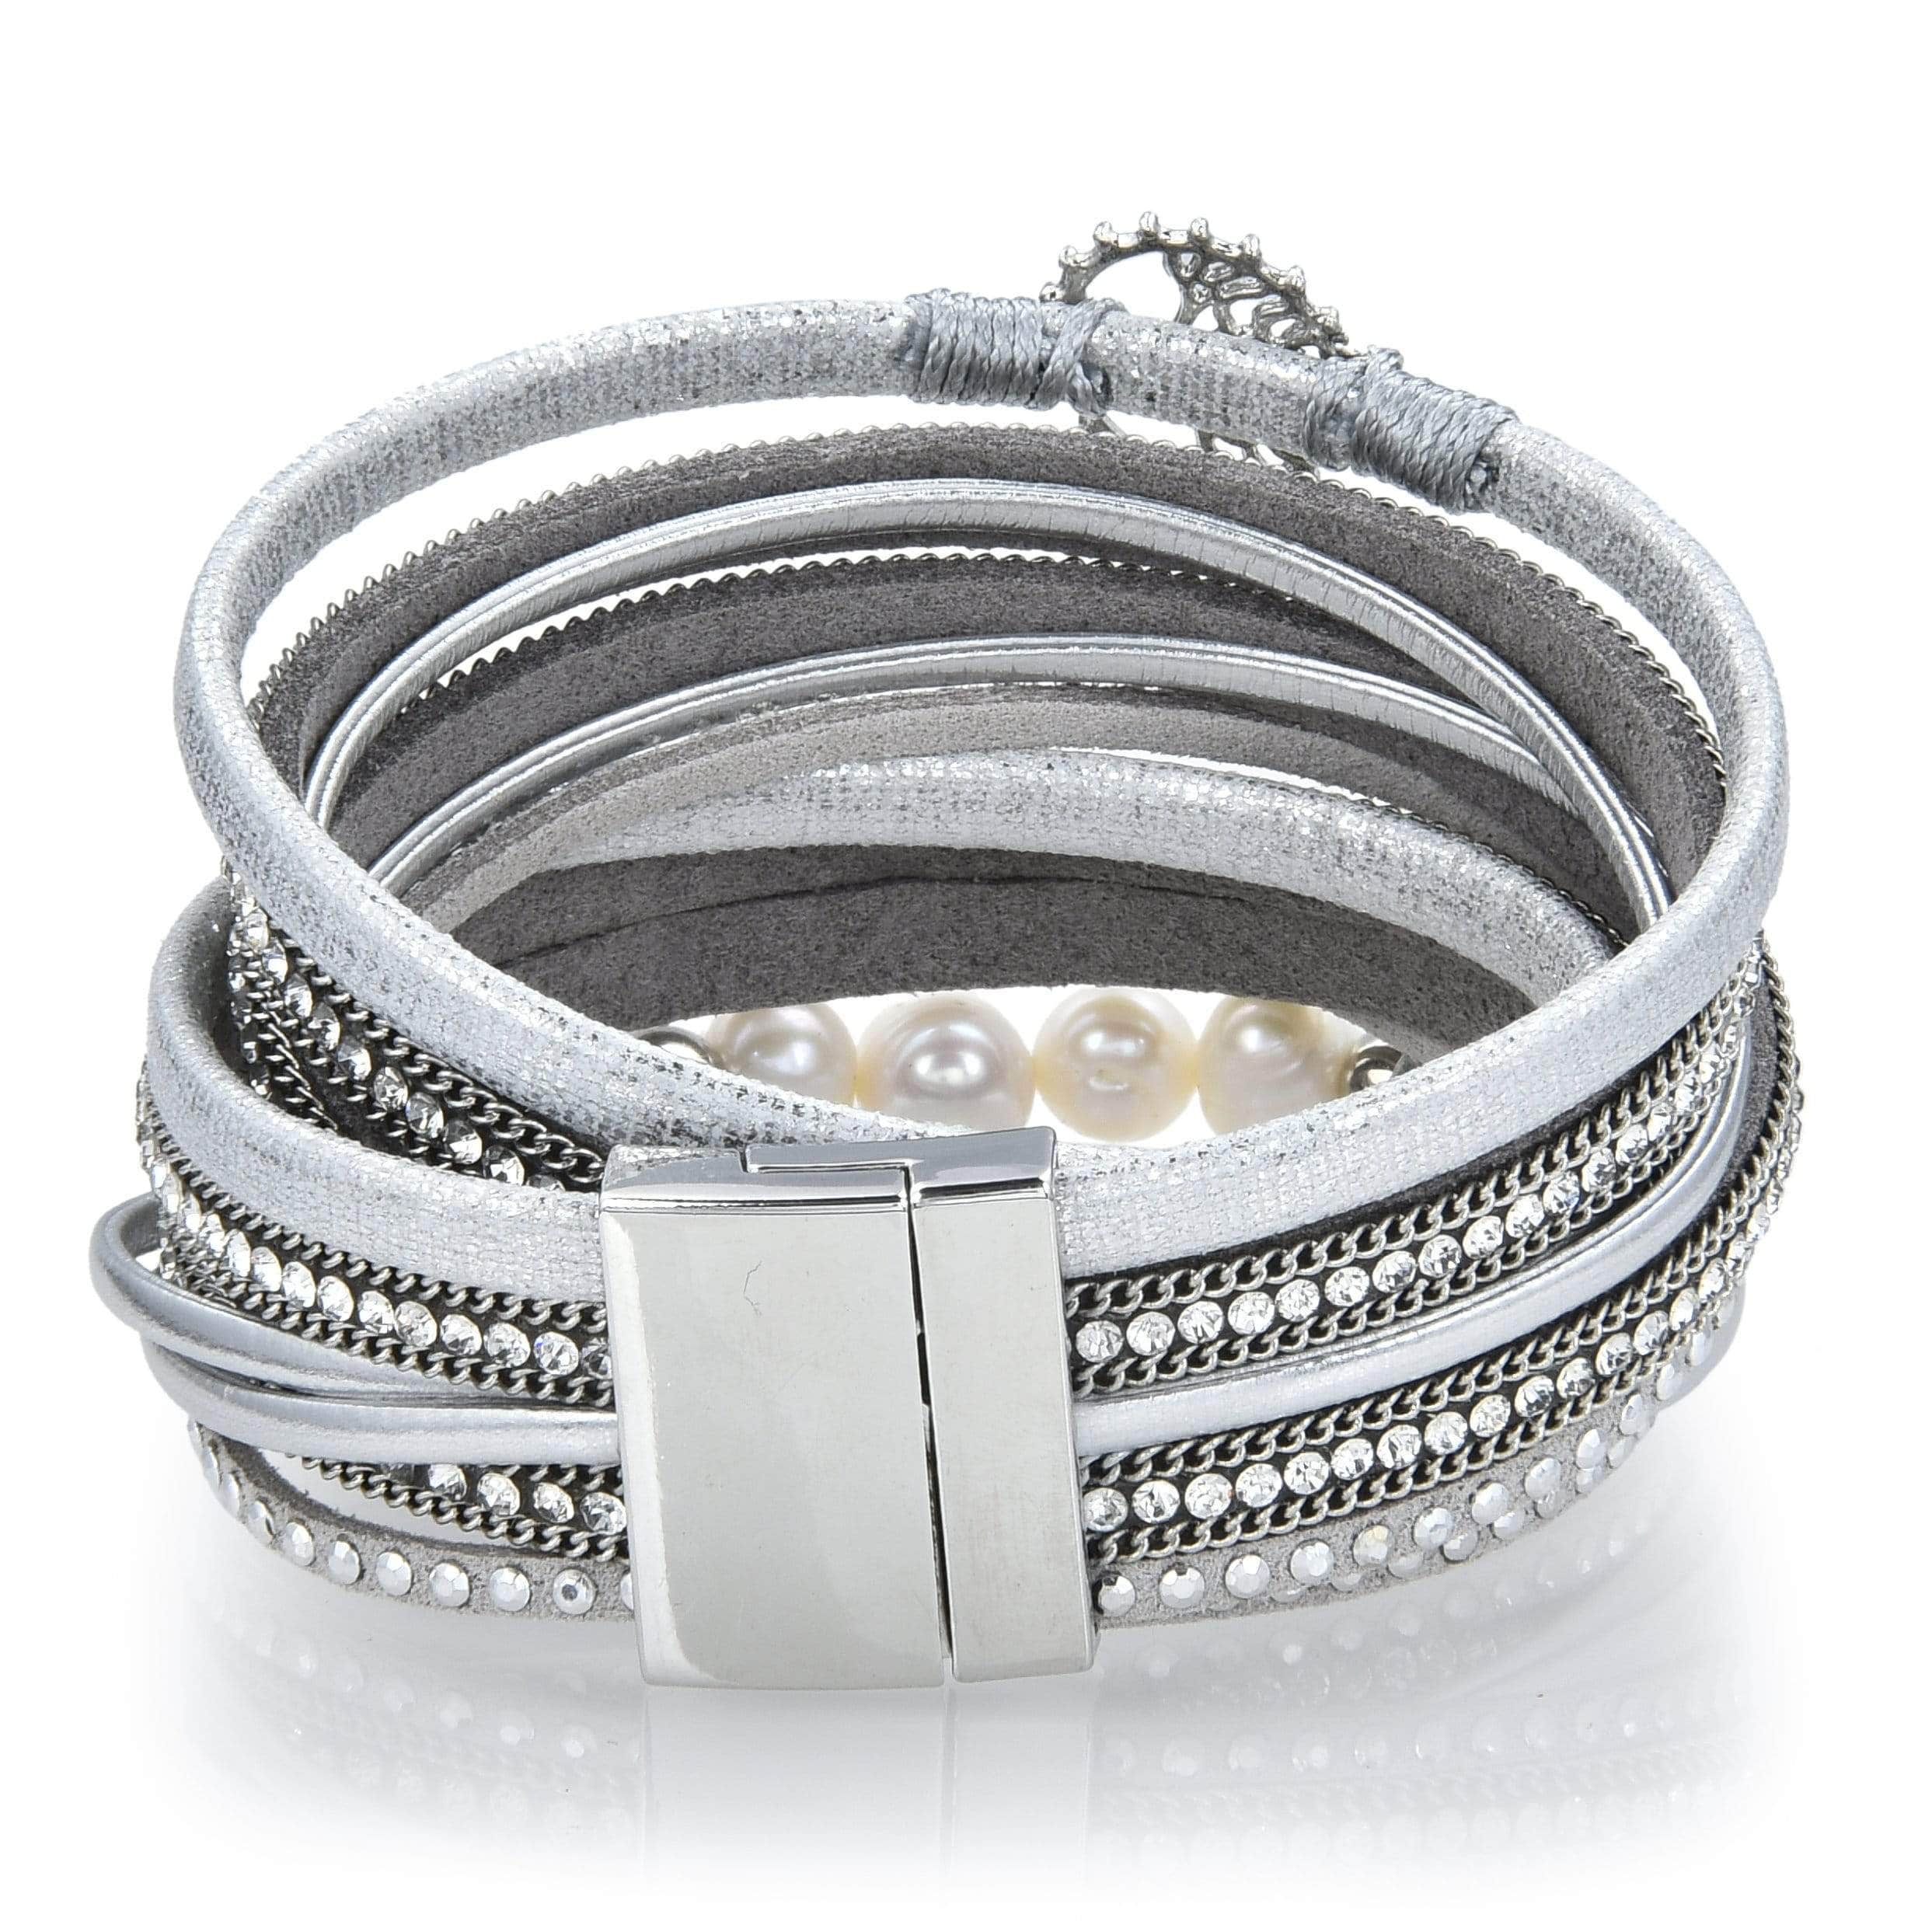 Bracelet: Multistrand Leather with Silver Spiral - The Roycroft Campus  Corporation